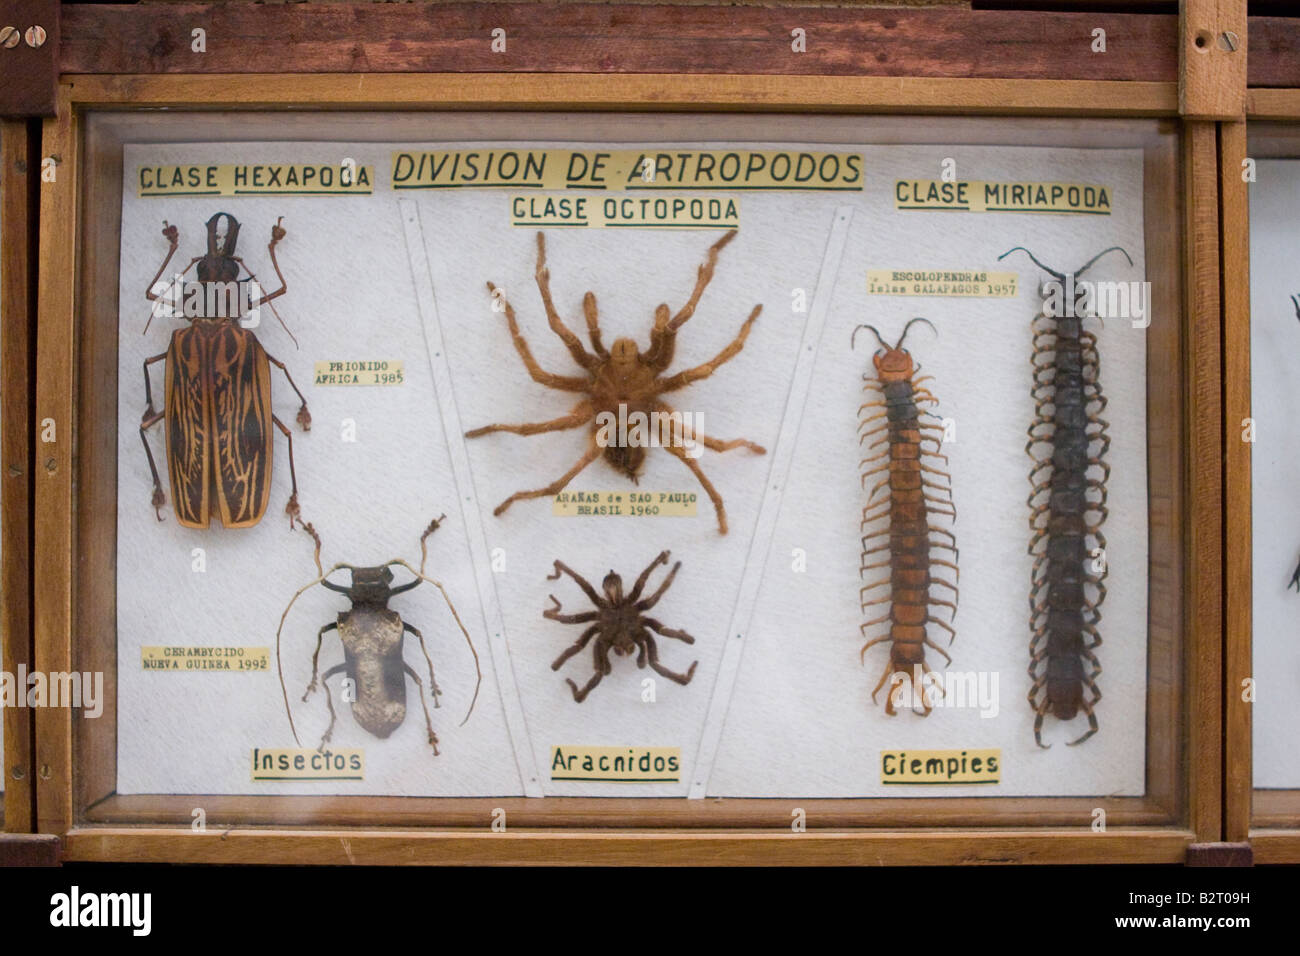 Arthropod division collection (spiders, centipede and insects) exhibited in Rocsen Museum, Nono, Cordoba, Argentina Stock Photo